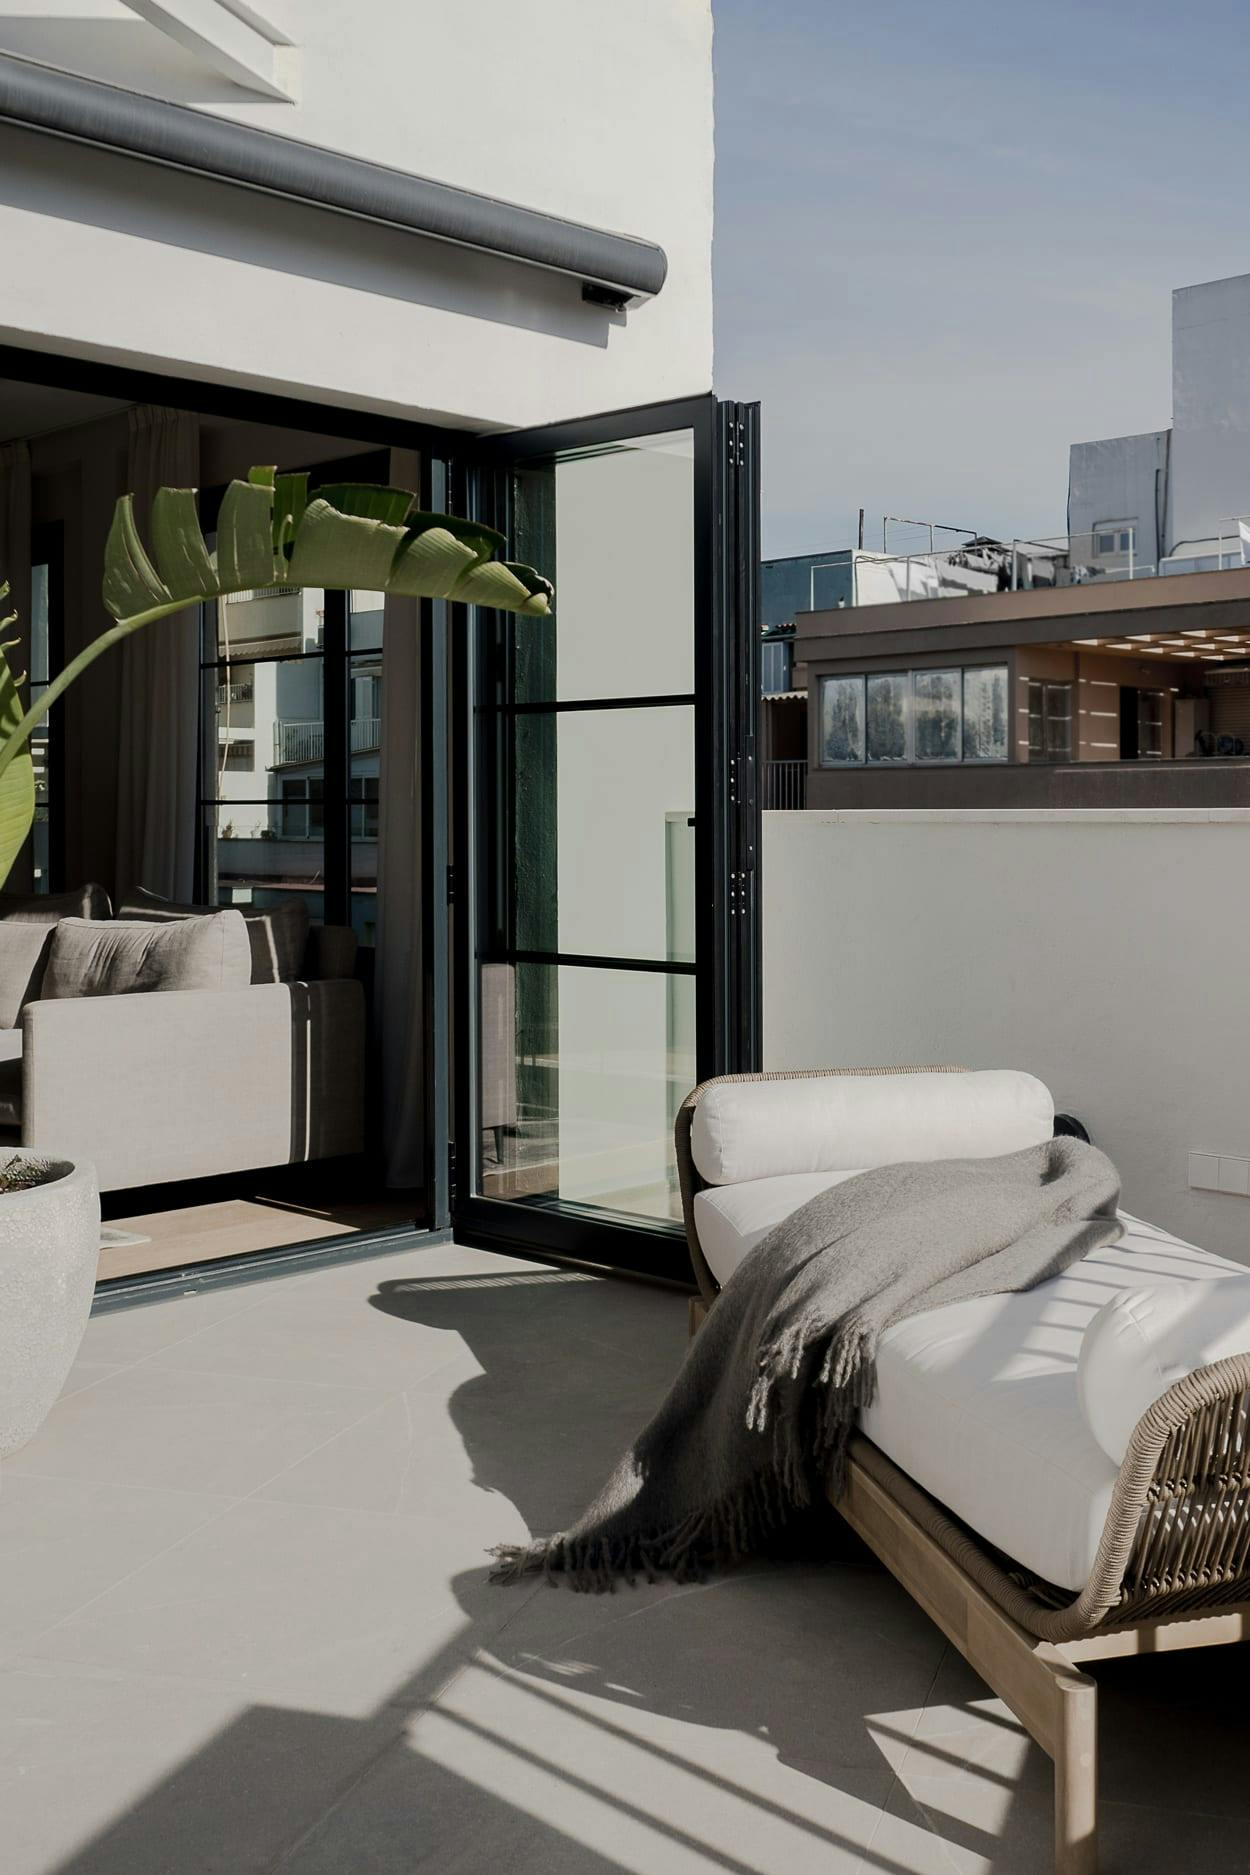 The image features a large, modern, and well-lit room with a white color scheme, featuring a large bed, a couch, and a chair. The room is located on a rooftop with a view of the city, and there are potted plants and a vase in the room.